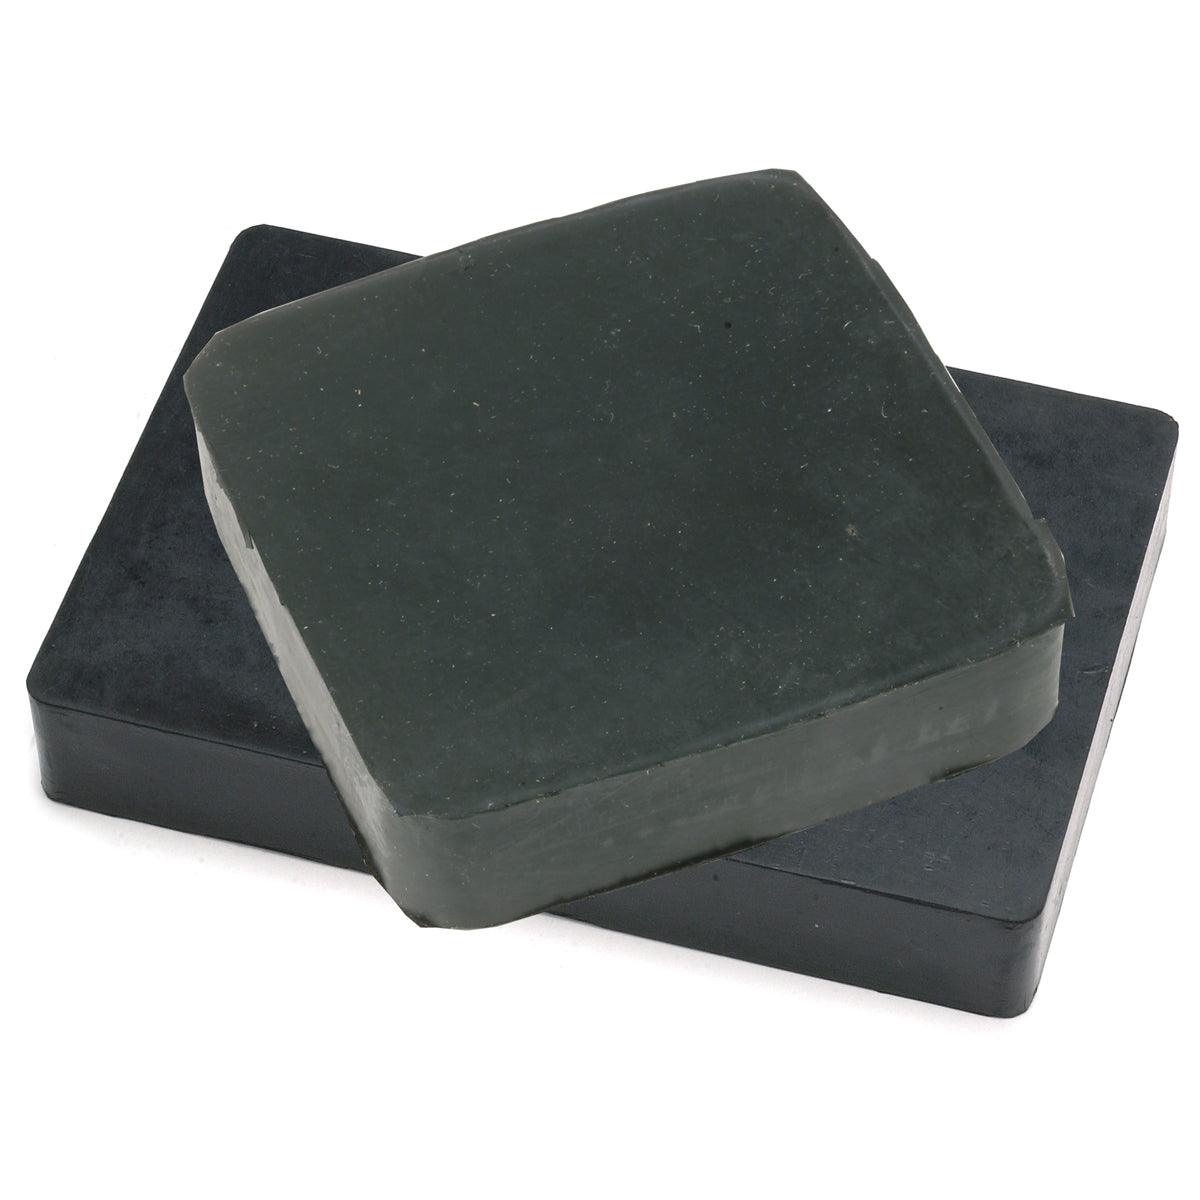 Universal Rubber Blocks 4-3/4”X 6-1/4” 1-1/2” Thick - Pack of 4